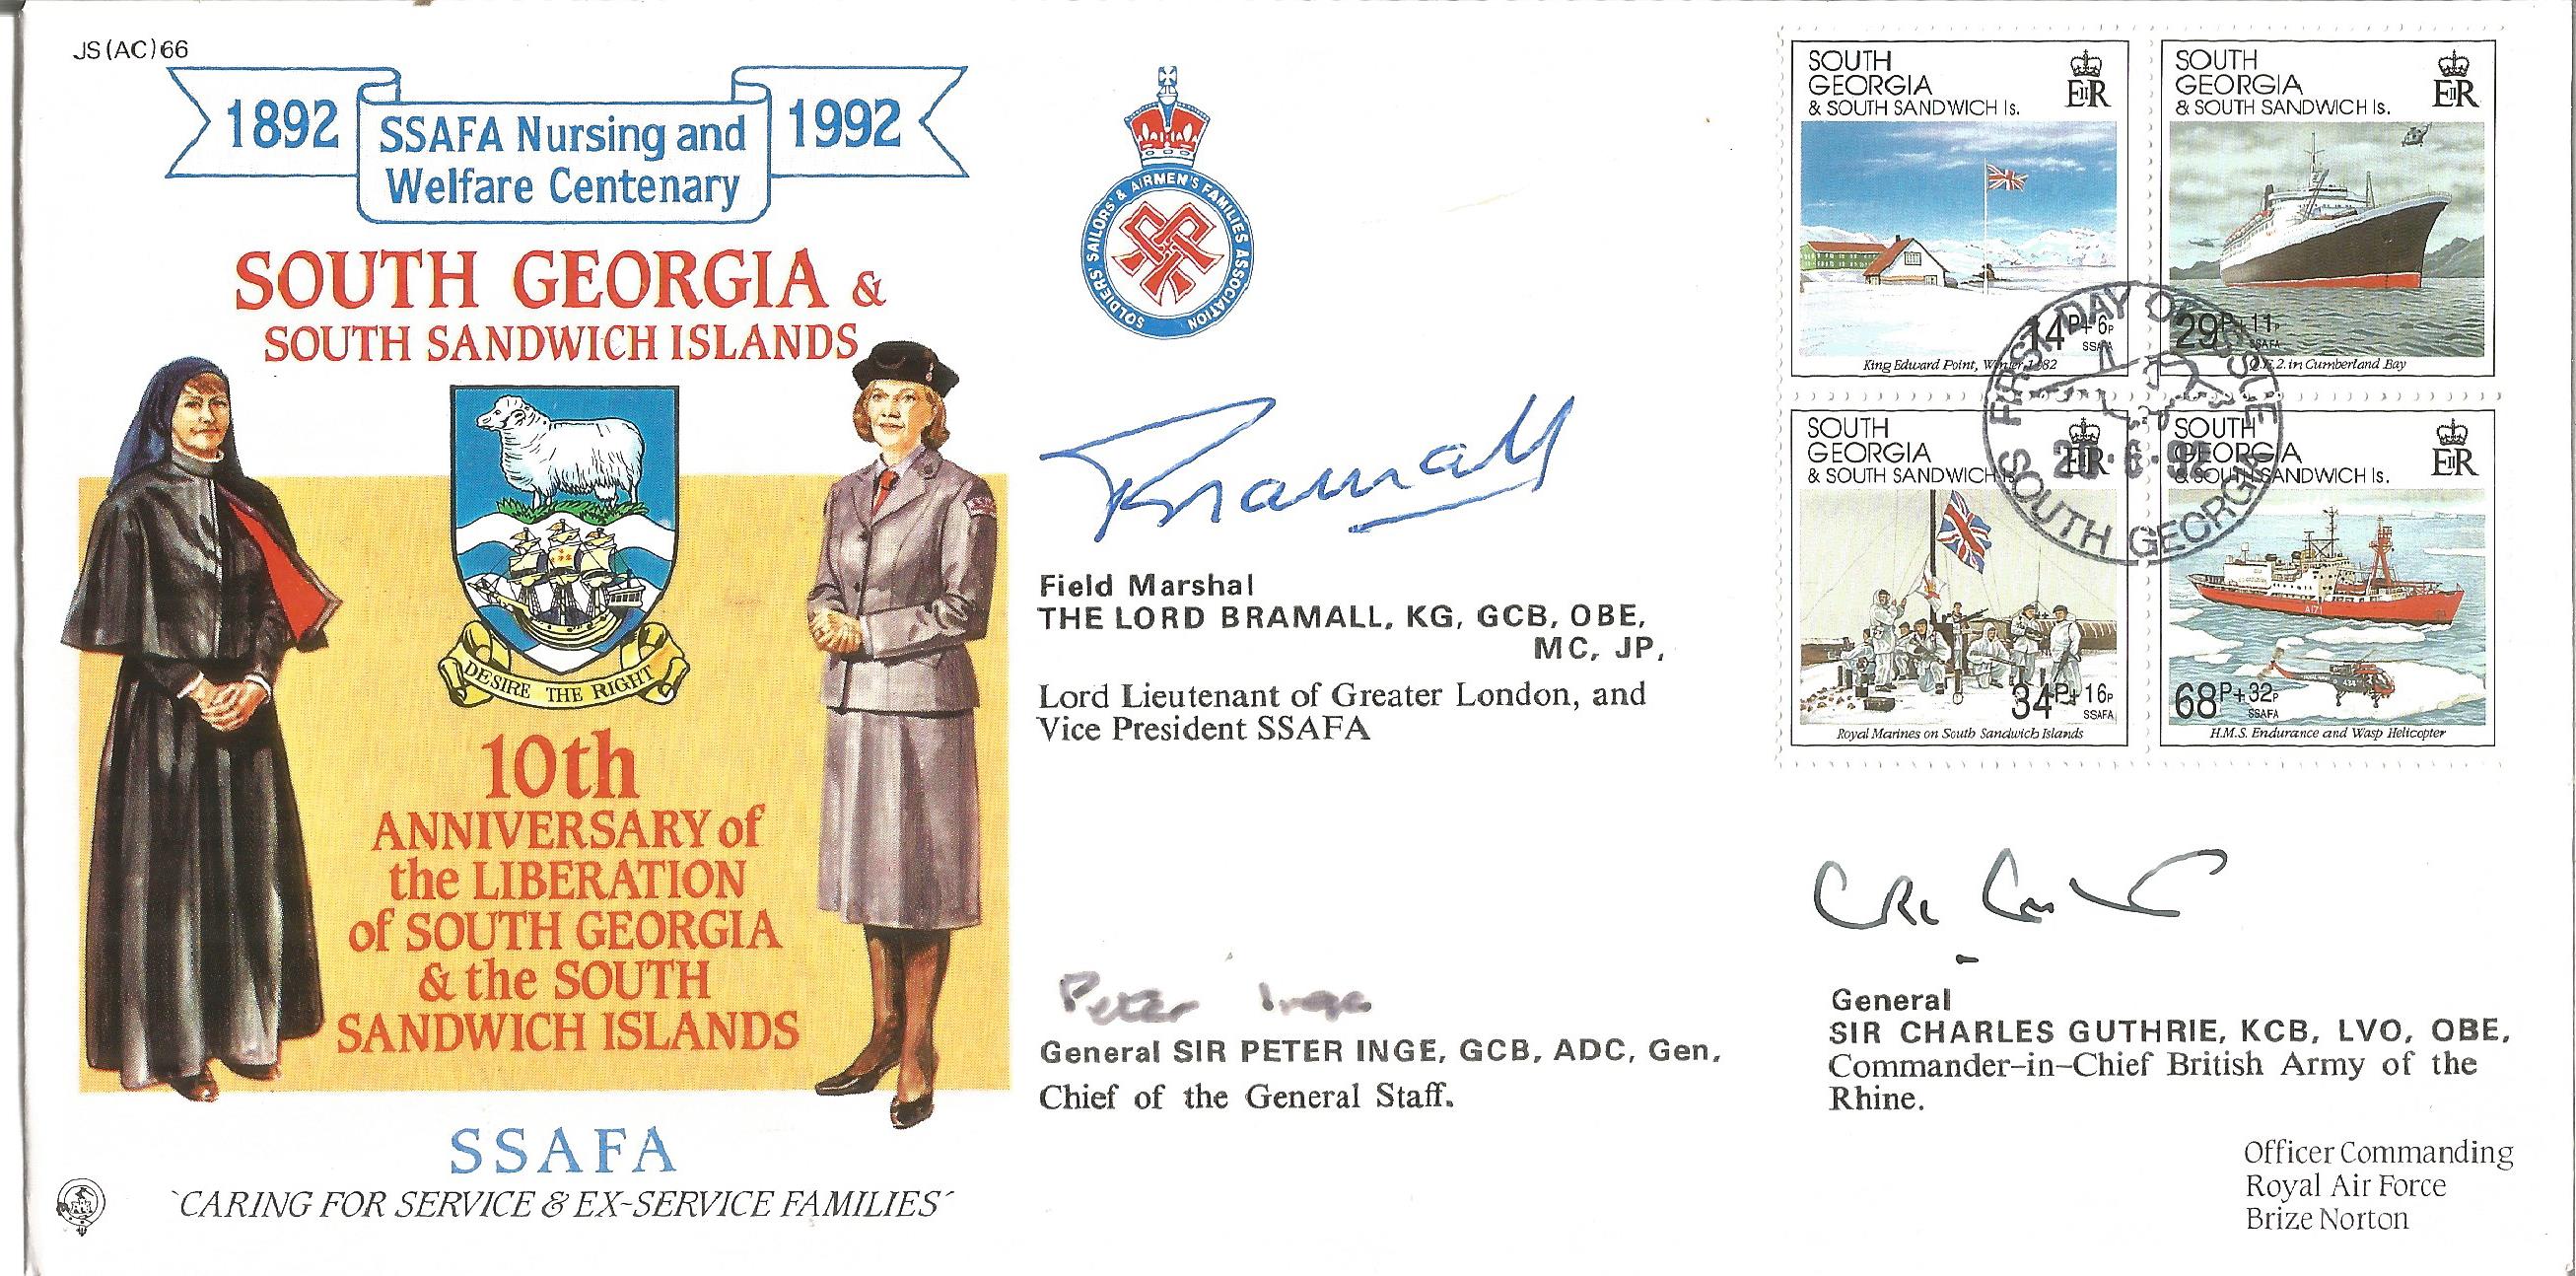 South Georgia and South Sandwich Islands 10th Anniversary of the Liberation SSAFA Centenary FDC